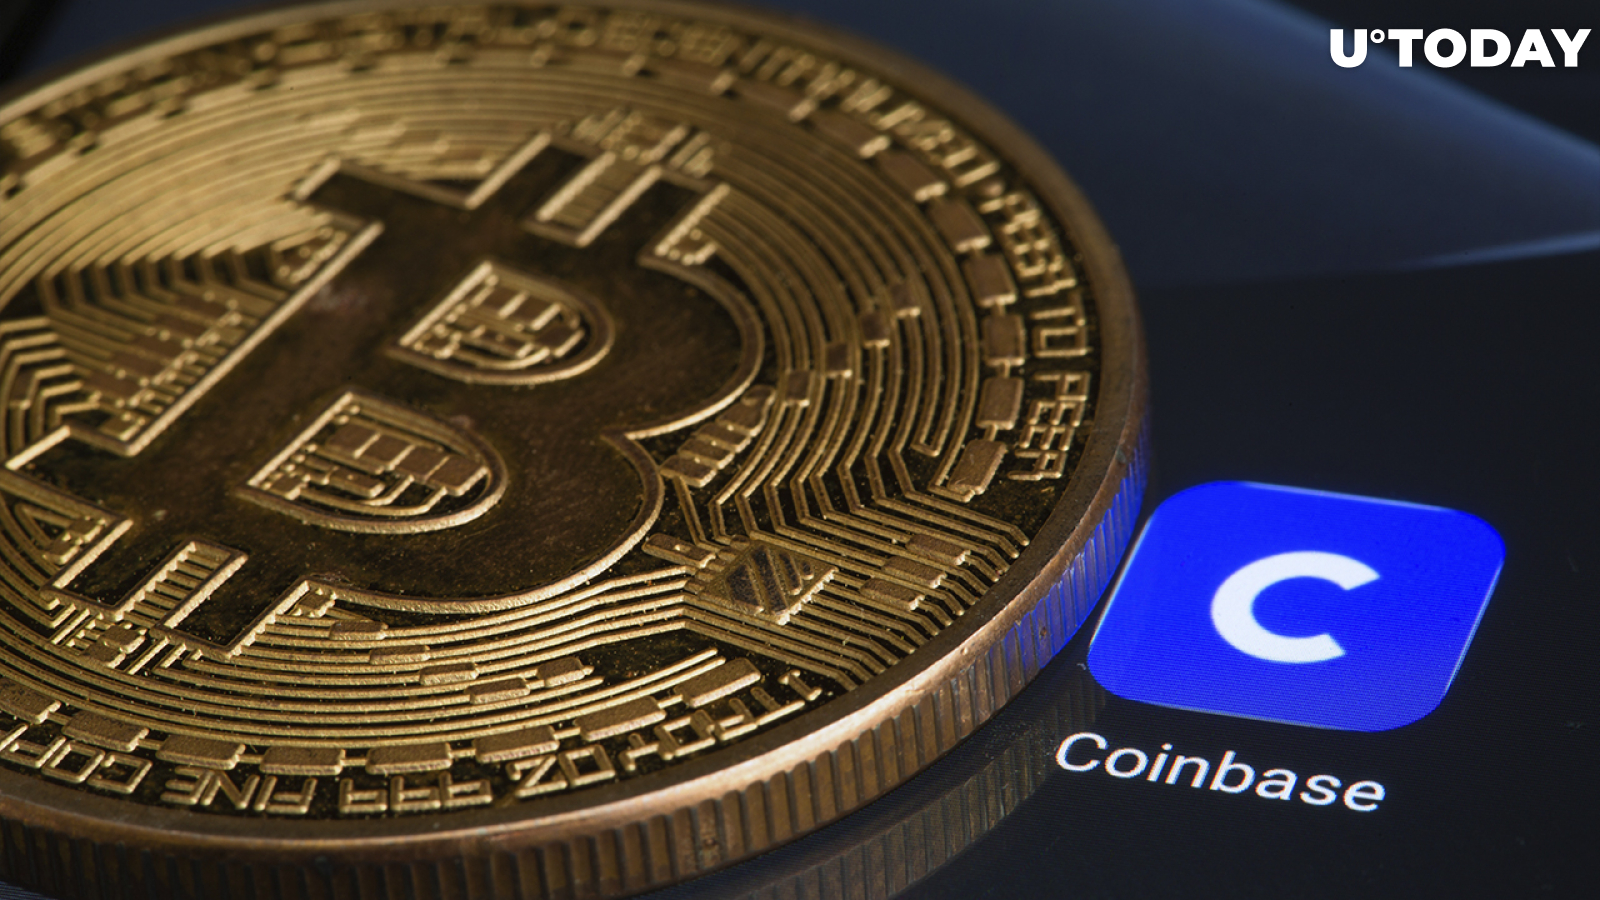 $703 Million in Bitcoin Withdrawn from Coinbase to Unknown Wallets, Here's Possible Reason